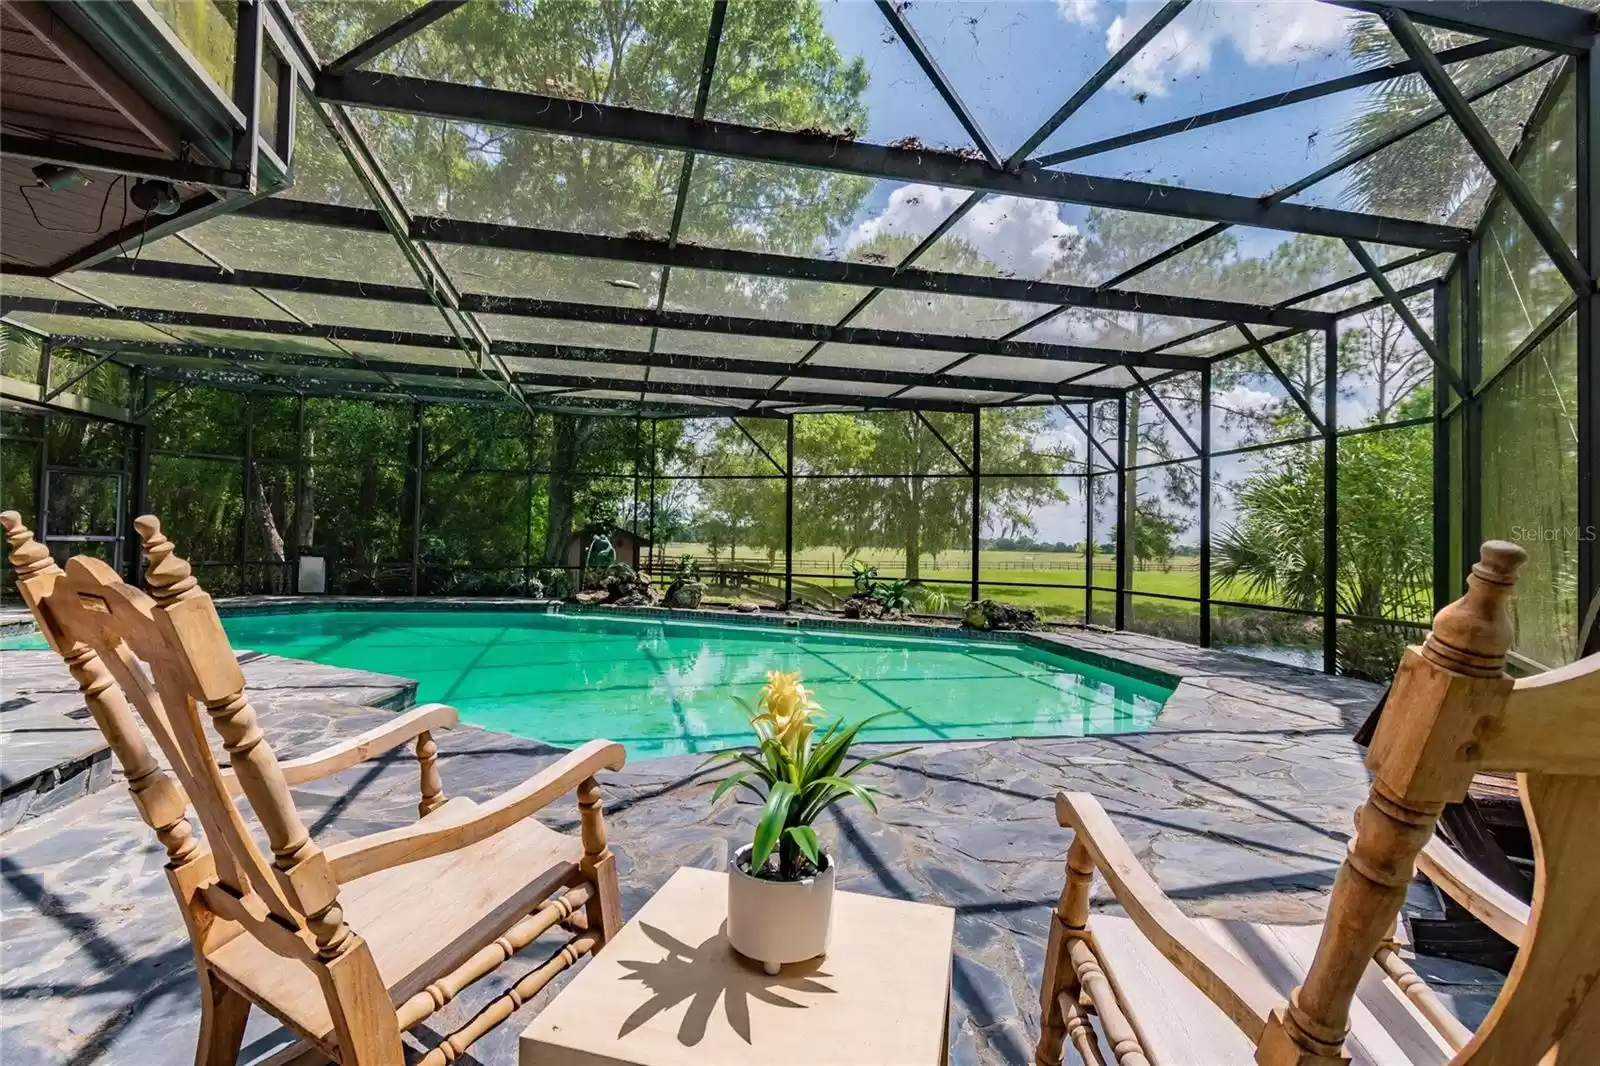 Covered lanai is perfect for entertaining and grilling with friends and family.